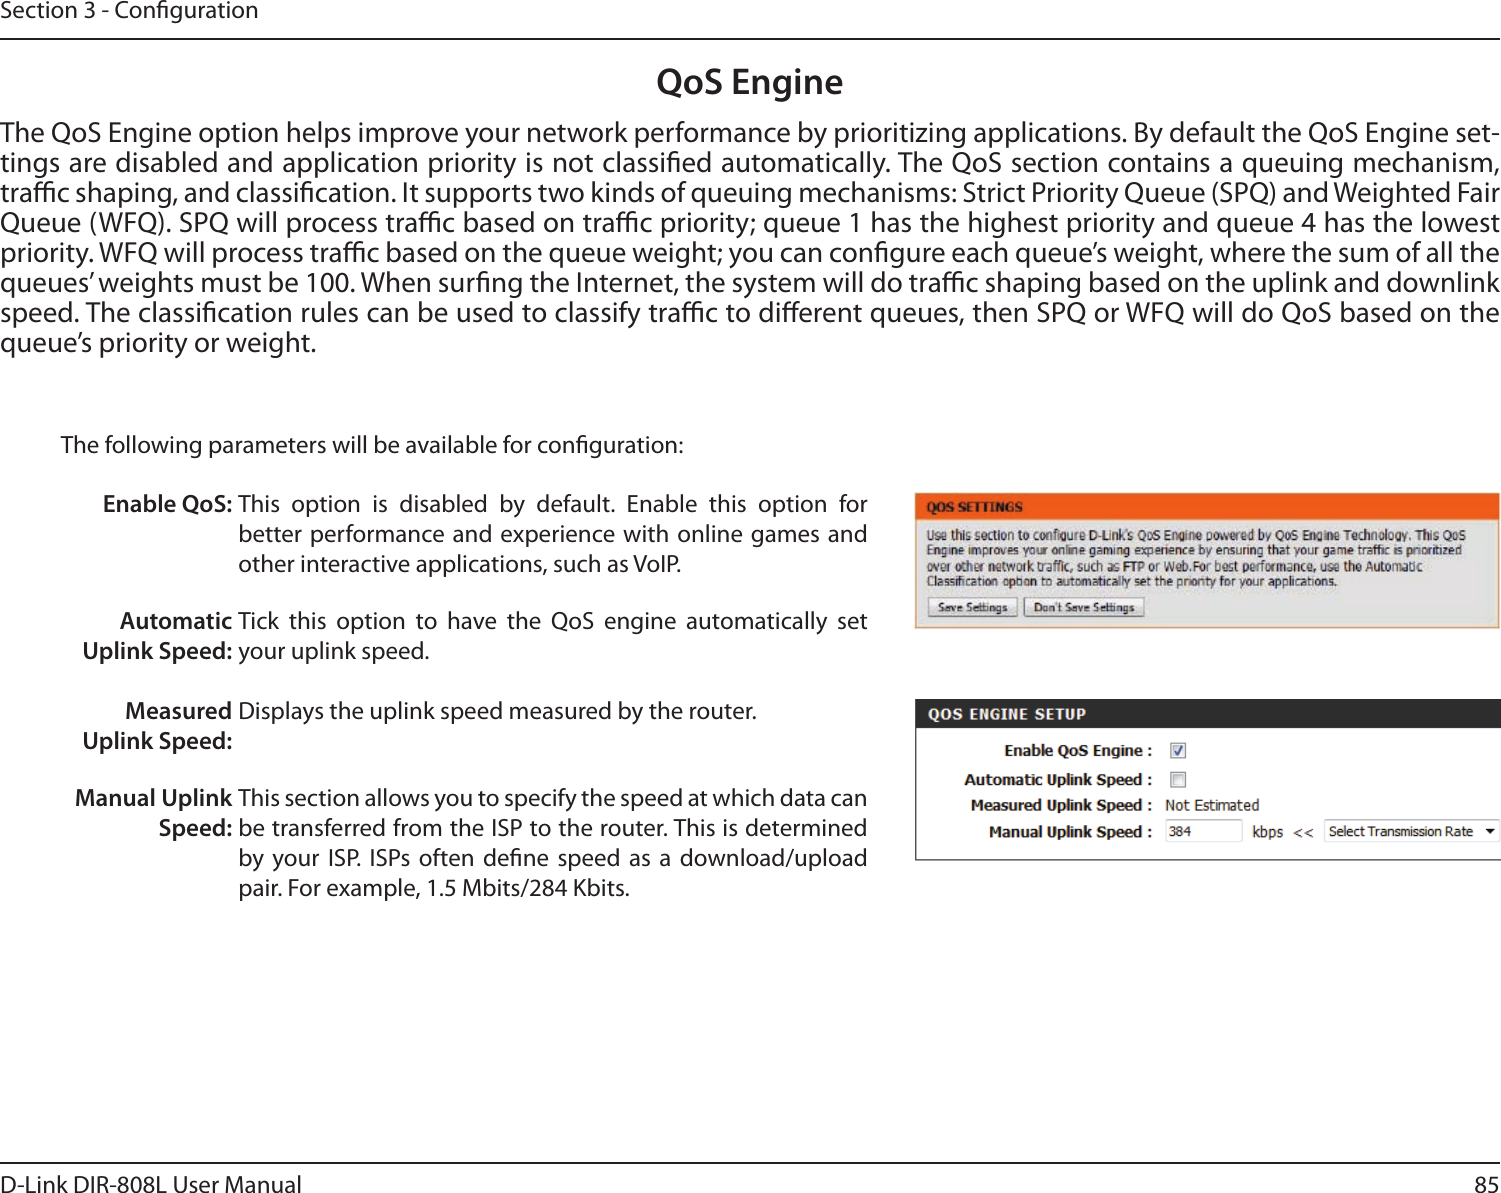 85D-Link DIR-808L User ManualSection 3 - CongurationQoS EngineThe QoS Engine option helps improve your network performance by prioritizing applications. By default the QoS Engine set-tings are disabled and application priority is not classied automatically. The QoS section contains a queuing mechanism, trac shaping, and classication. It supports two kinds of queuing mechanisms: Strict Priority Queue (SPQ) and Weighted Fair Queue (WFQ). SPQ will process trac based on trac priority; queue 1 has the highest priority and queue 4 has the lowest priority. WFQ will process trac based on the queue weight; you can congure each queue’s weight, where the sum of all the queues’ weights must be 100. When surng the Internet, the system will do trac shaping based on the uplink and downlink speed. The classication rules can be used to classify trac to dierent queues, then SPQ or WFQ will do QoS based on the queue’s priority or weight.The following parameters will be available for conguration:Enable QoS: This  option  is  disabled  by  default.  Enable  this  option  for  better performance and experience with online games  and other interactive applications, such as VoIP.Automatic Uplink Speed: Measured Uplink Speed:Tick  this  option  to  have  the  QoS  engine  automatically  set your uplink speed. Displays the uplink speed measured by the router. Manual Uplink  Speed:This section allows you to specify the speed at which data can be transferred from the ISP to the router. This is determined by your ISP.  ISPs often  dene  speed  as  a  download/upload pair. For example, 1.5 Mbits/284 Kbits. 